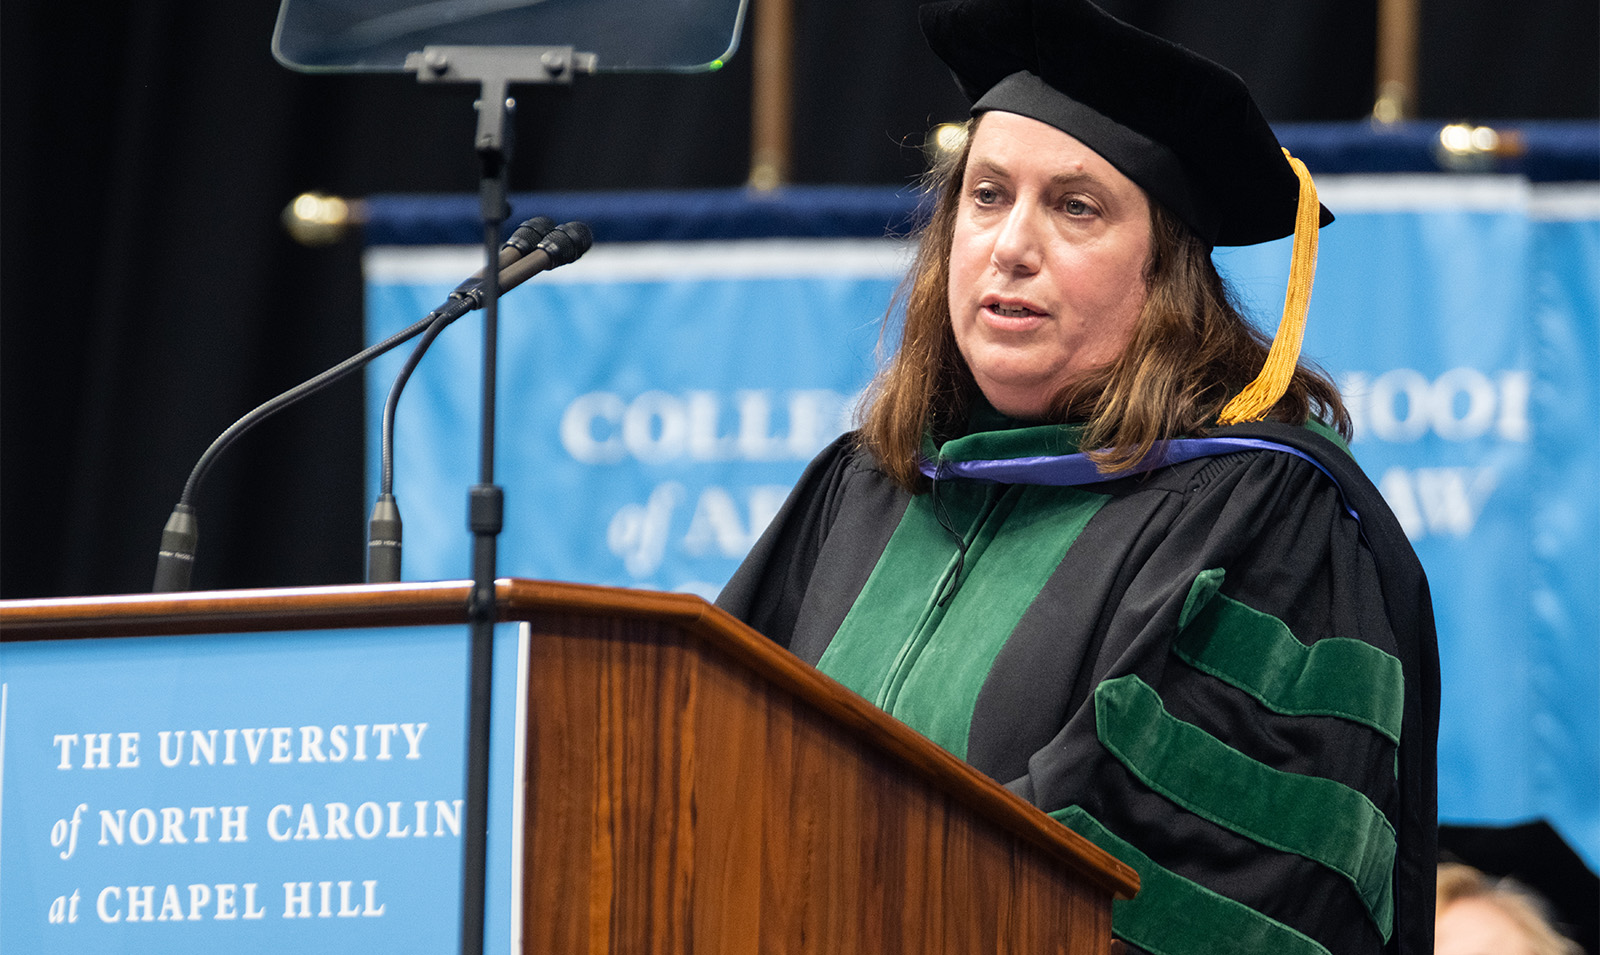 Dr. Samantha Meltzer-Brody speaking at a dais at Winter Commencement.